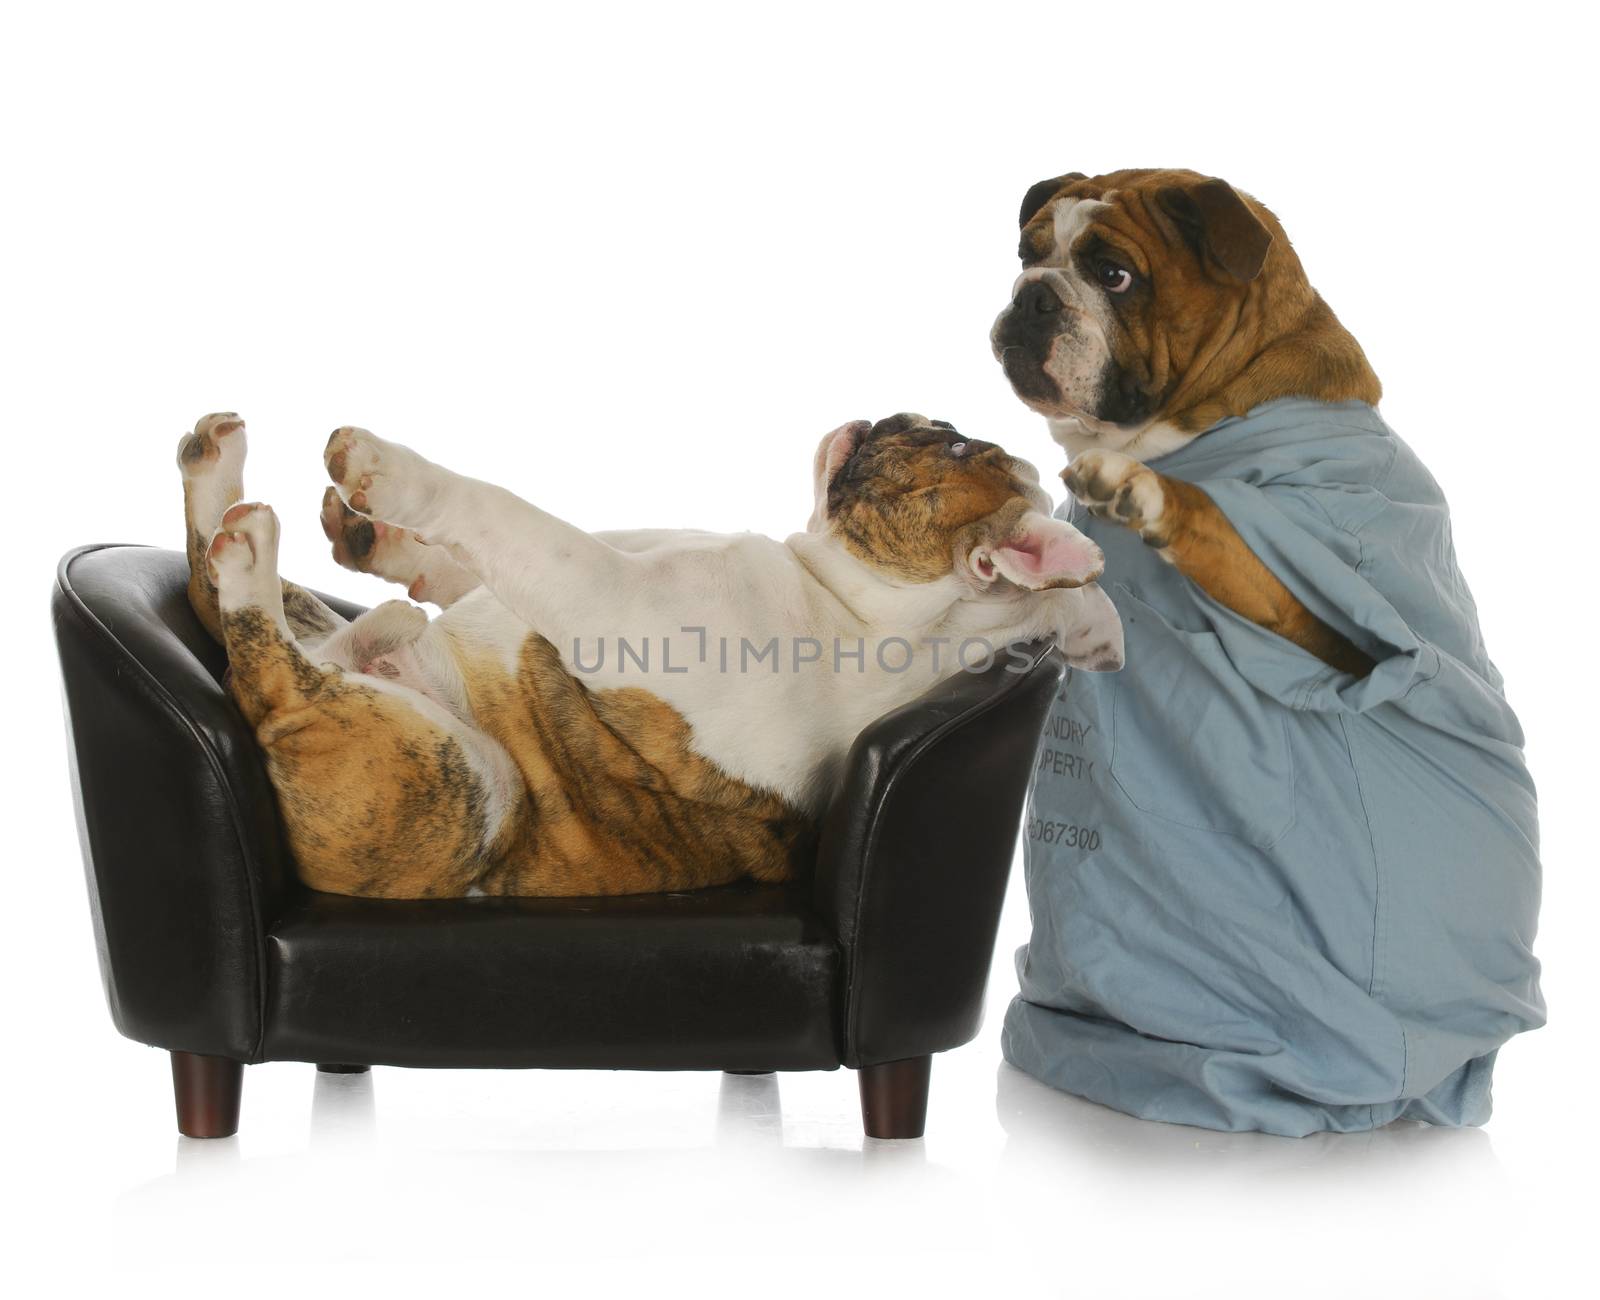 veterinary care - english bulldog doctor tending to sick bulldog laying on leather couch with reflecion on white background